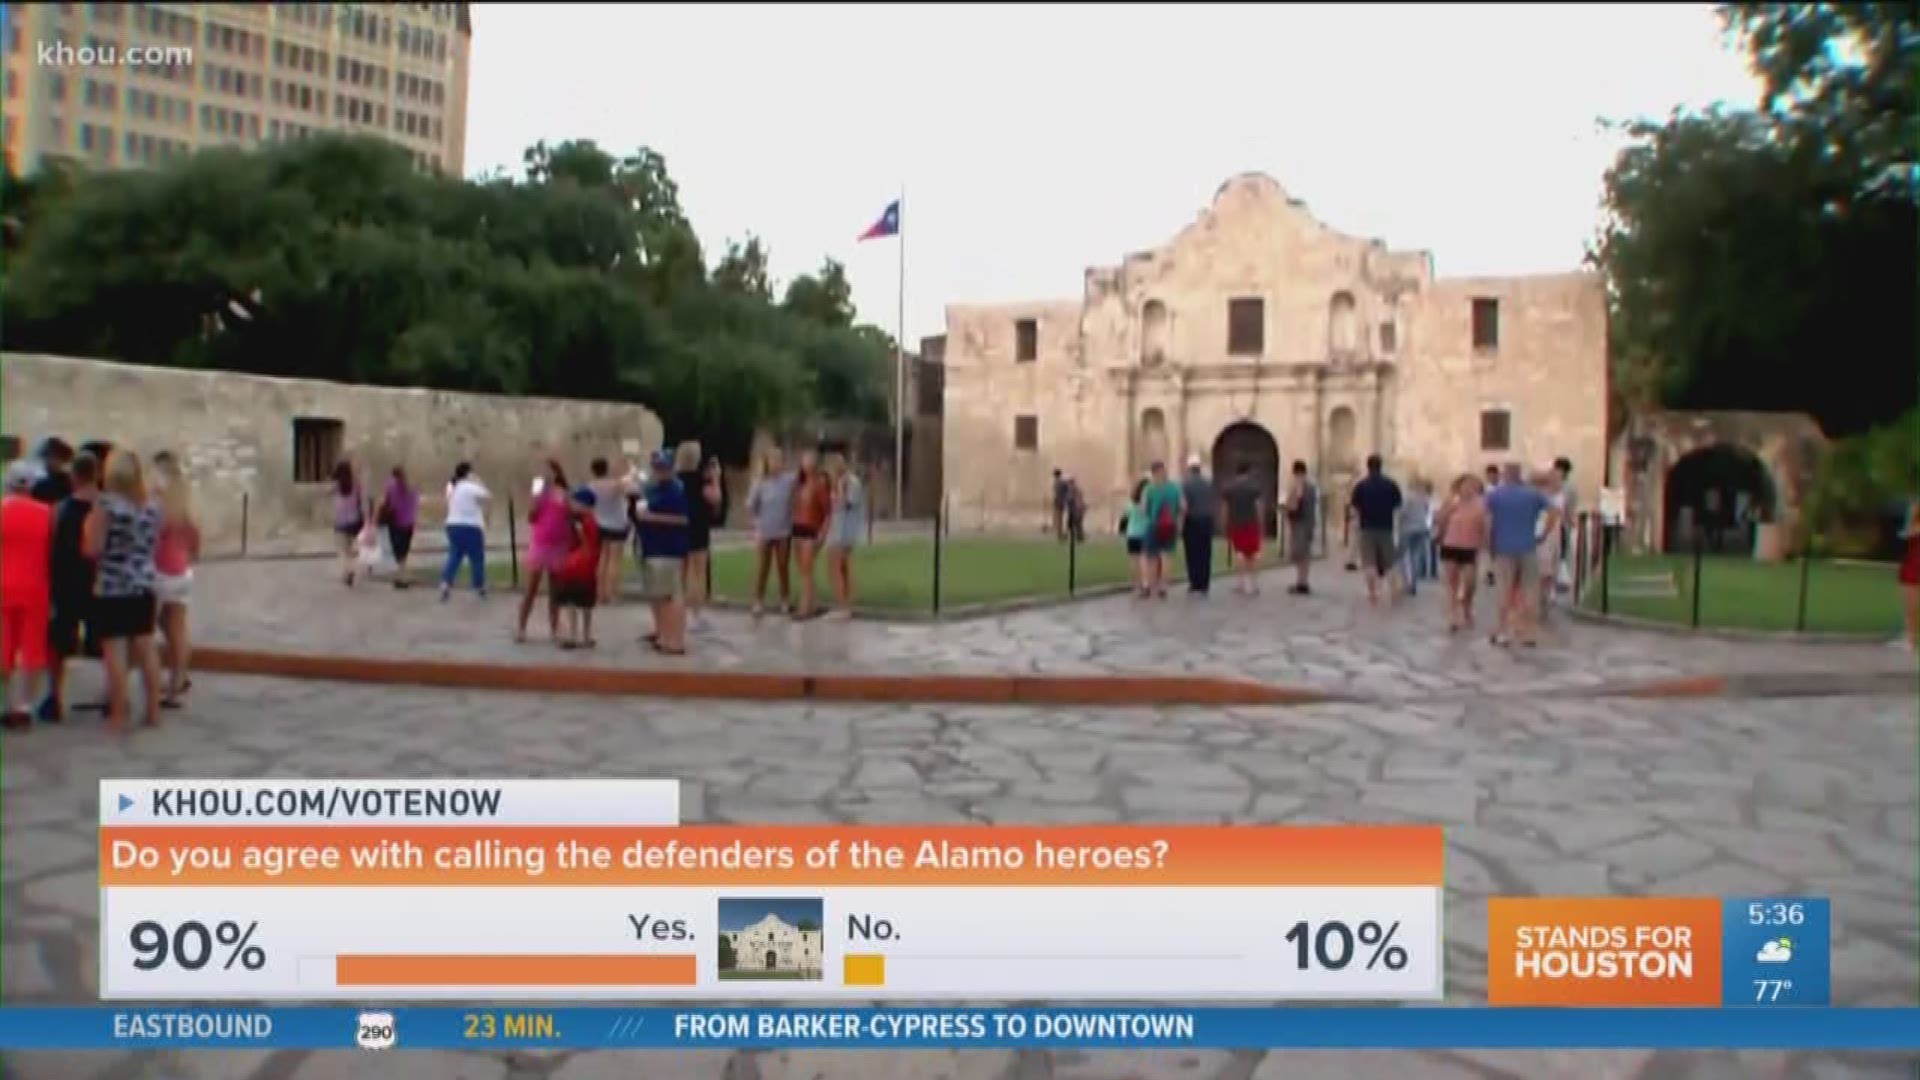 A Texas education board workgroup that had recommended not describing Alamo defenders as "heroic" in seventh-grade social studies curriculum standards changed course Tuesday after public backlash.